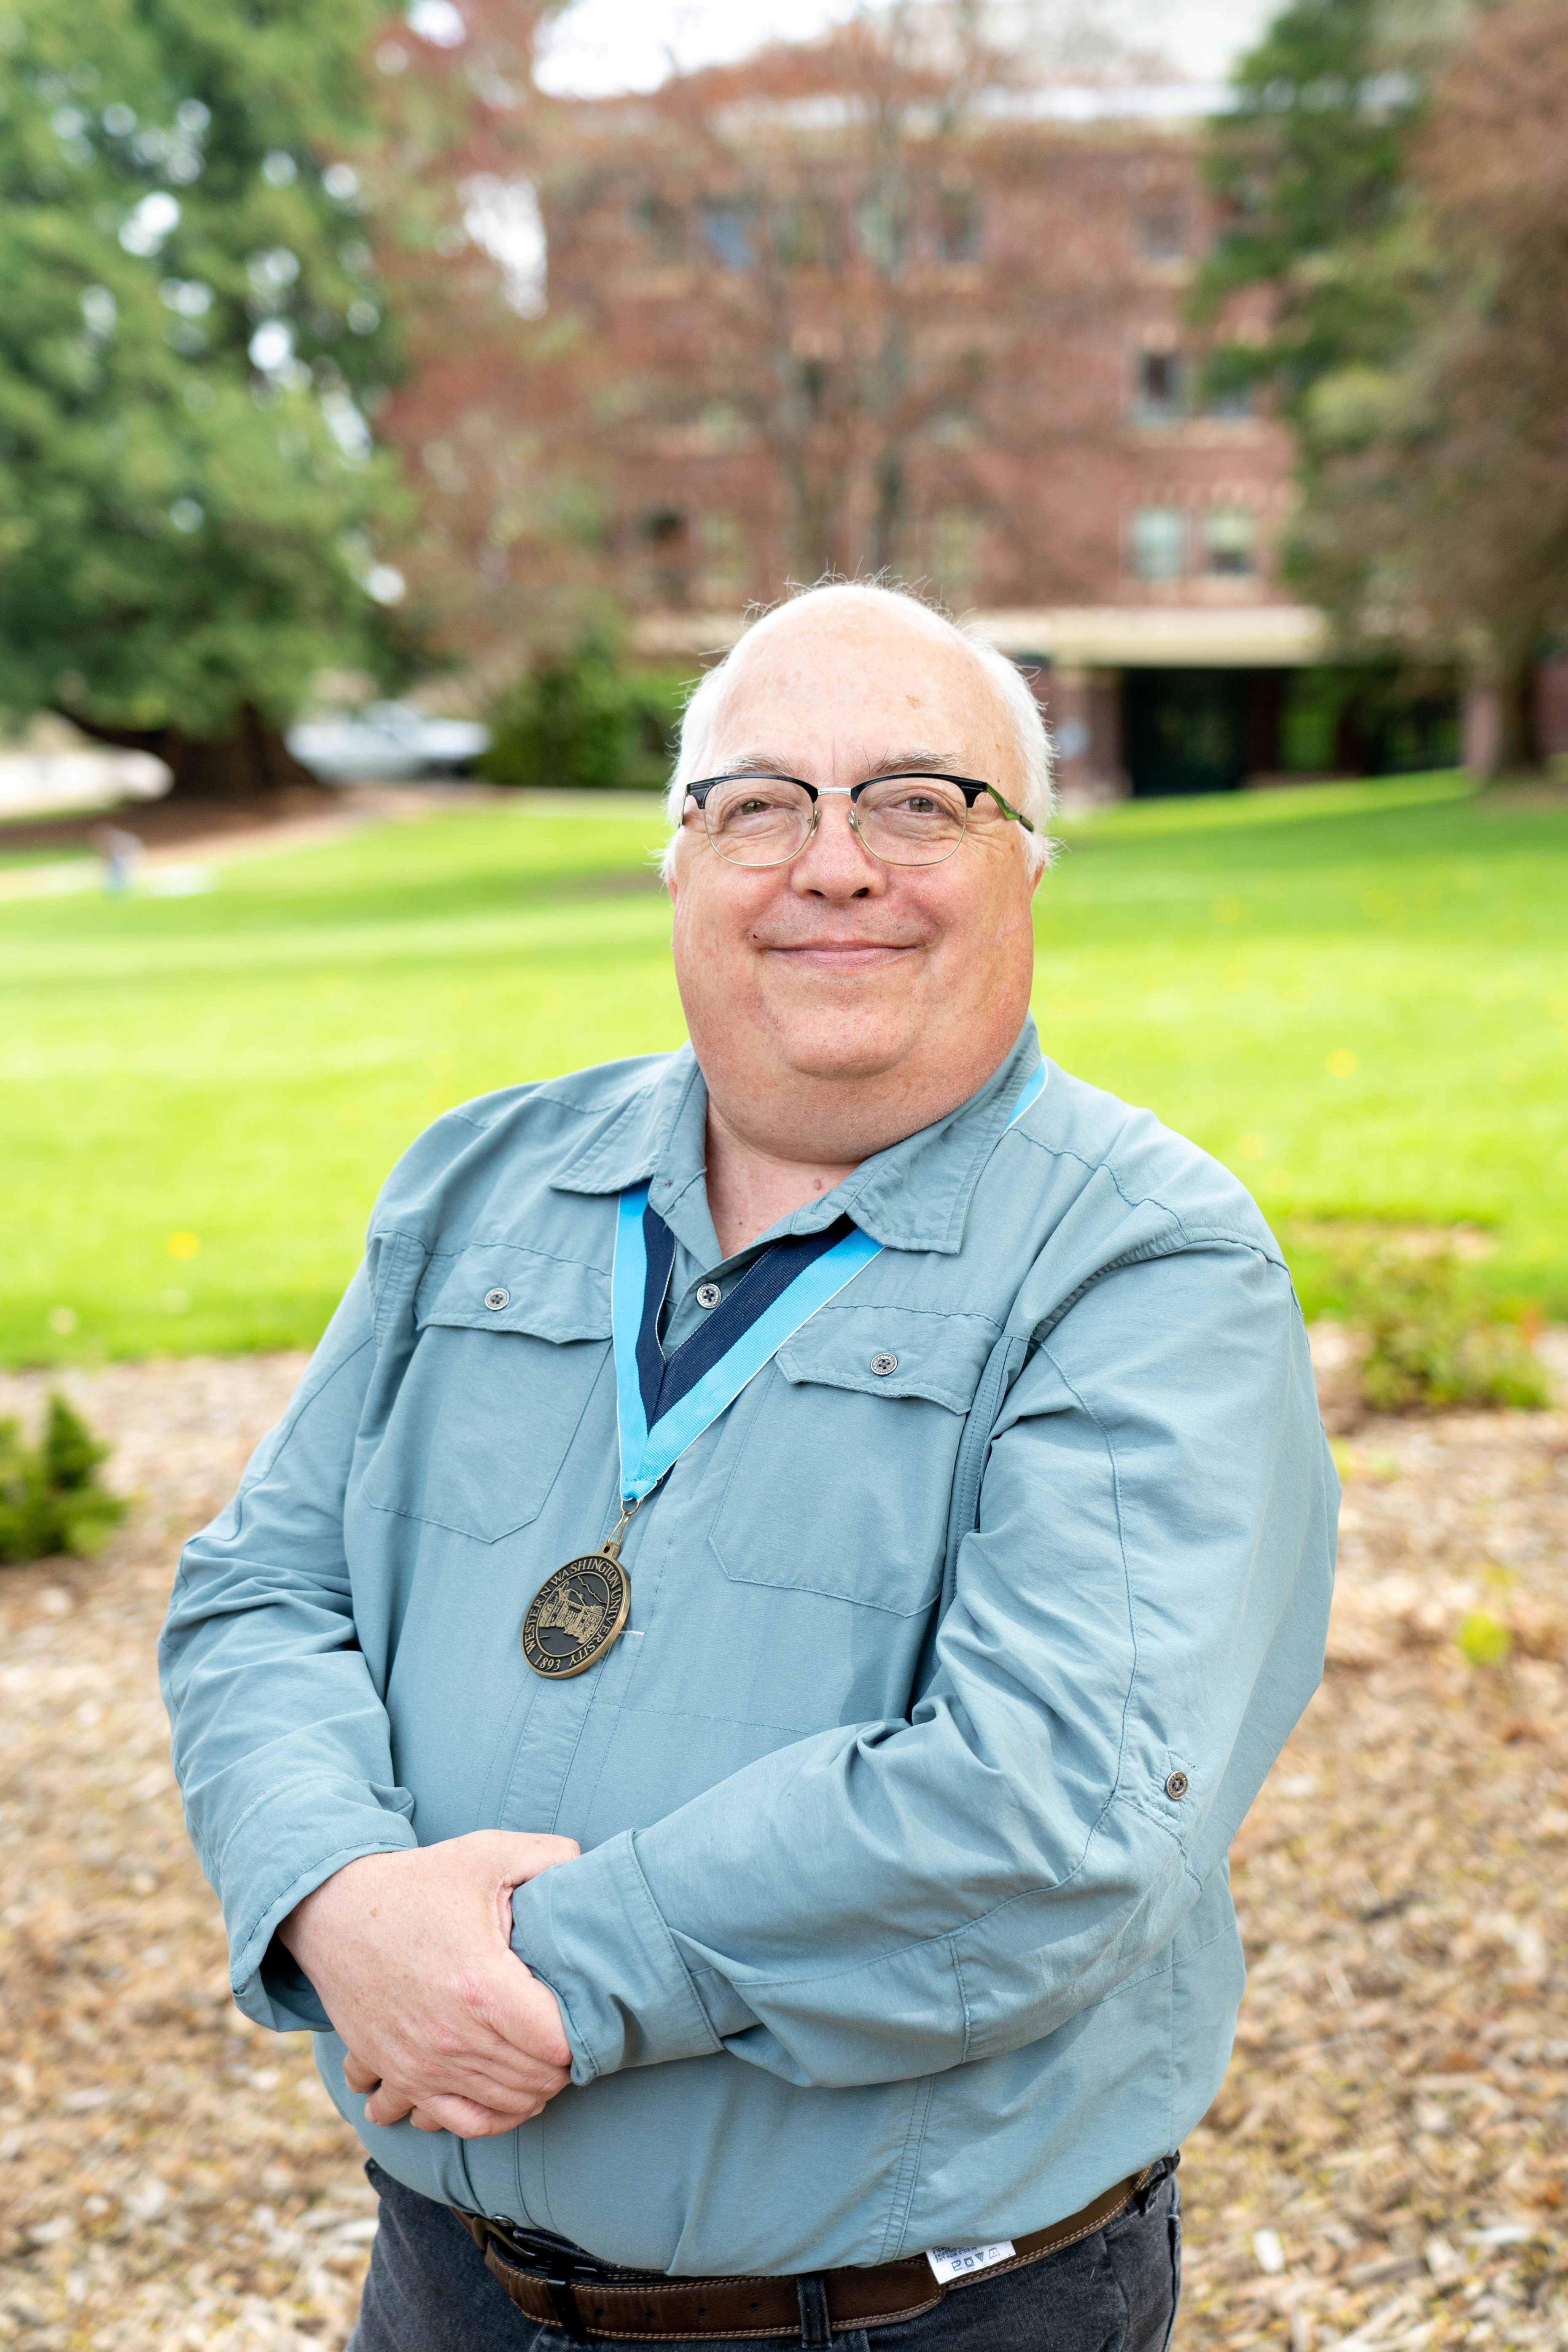 Robert Clark smiles proudly with Edens Hall behind him while wearing a WWU award medallion on a neck ribbon